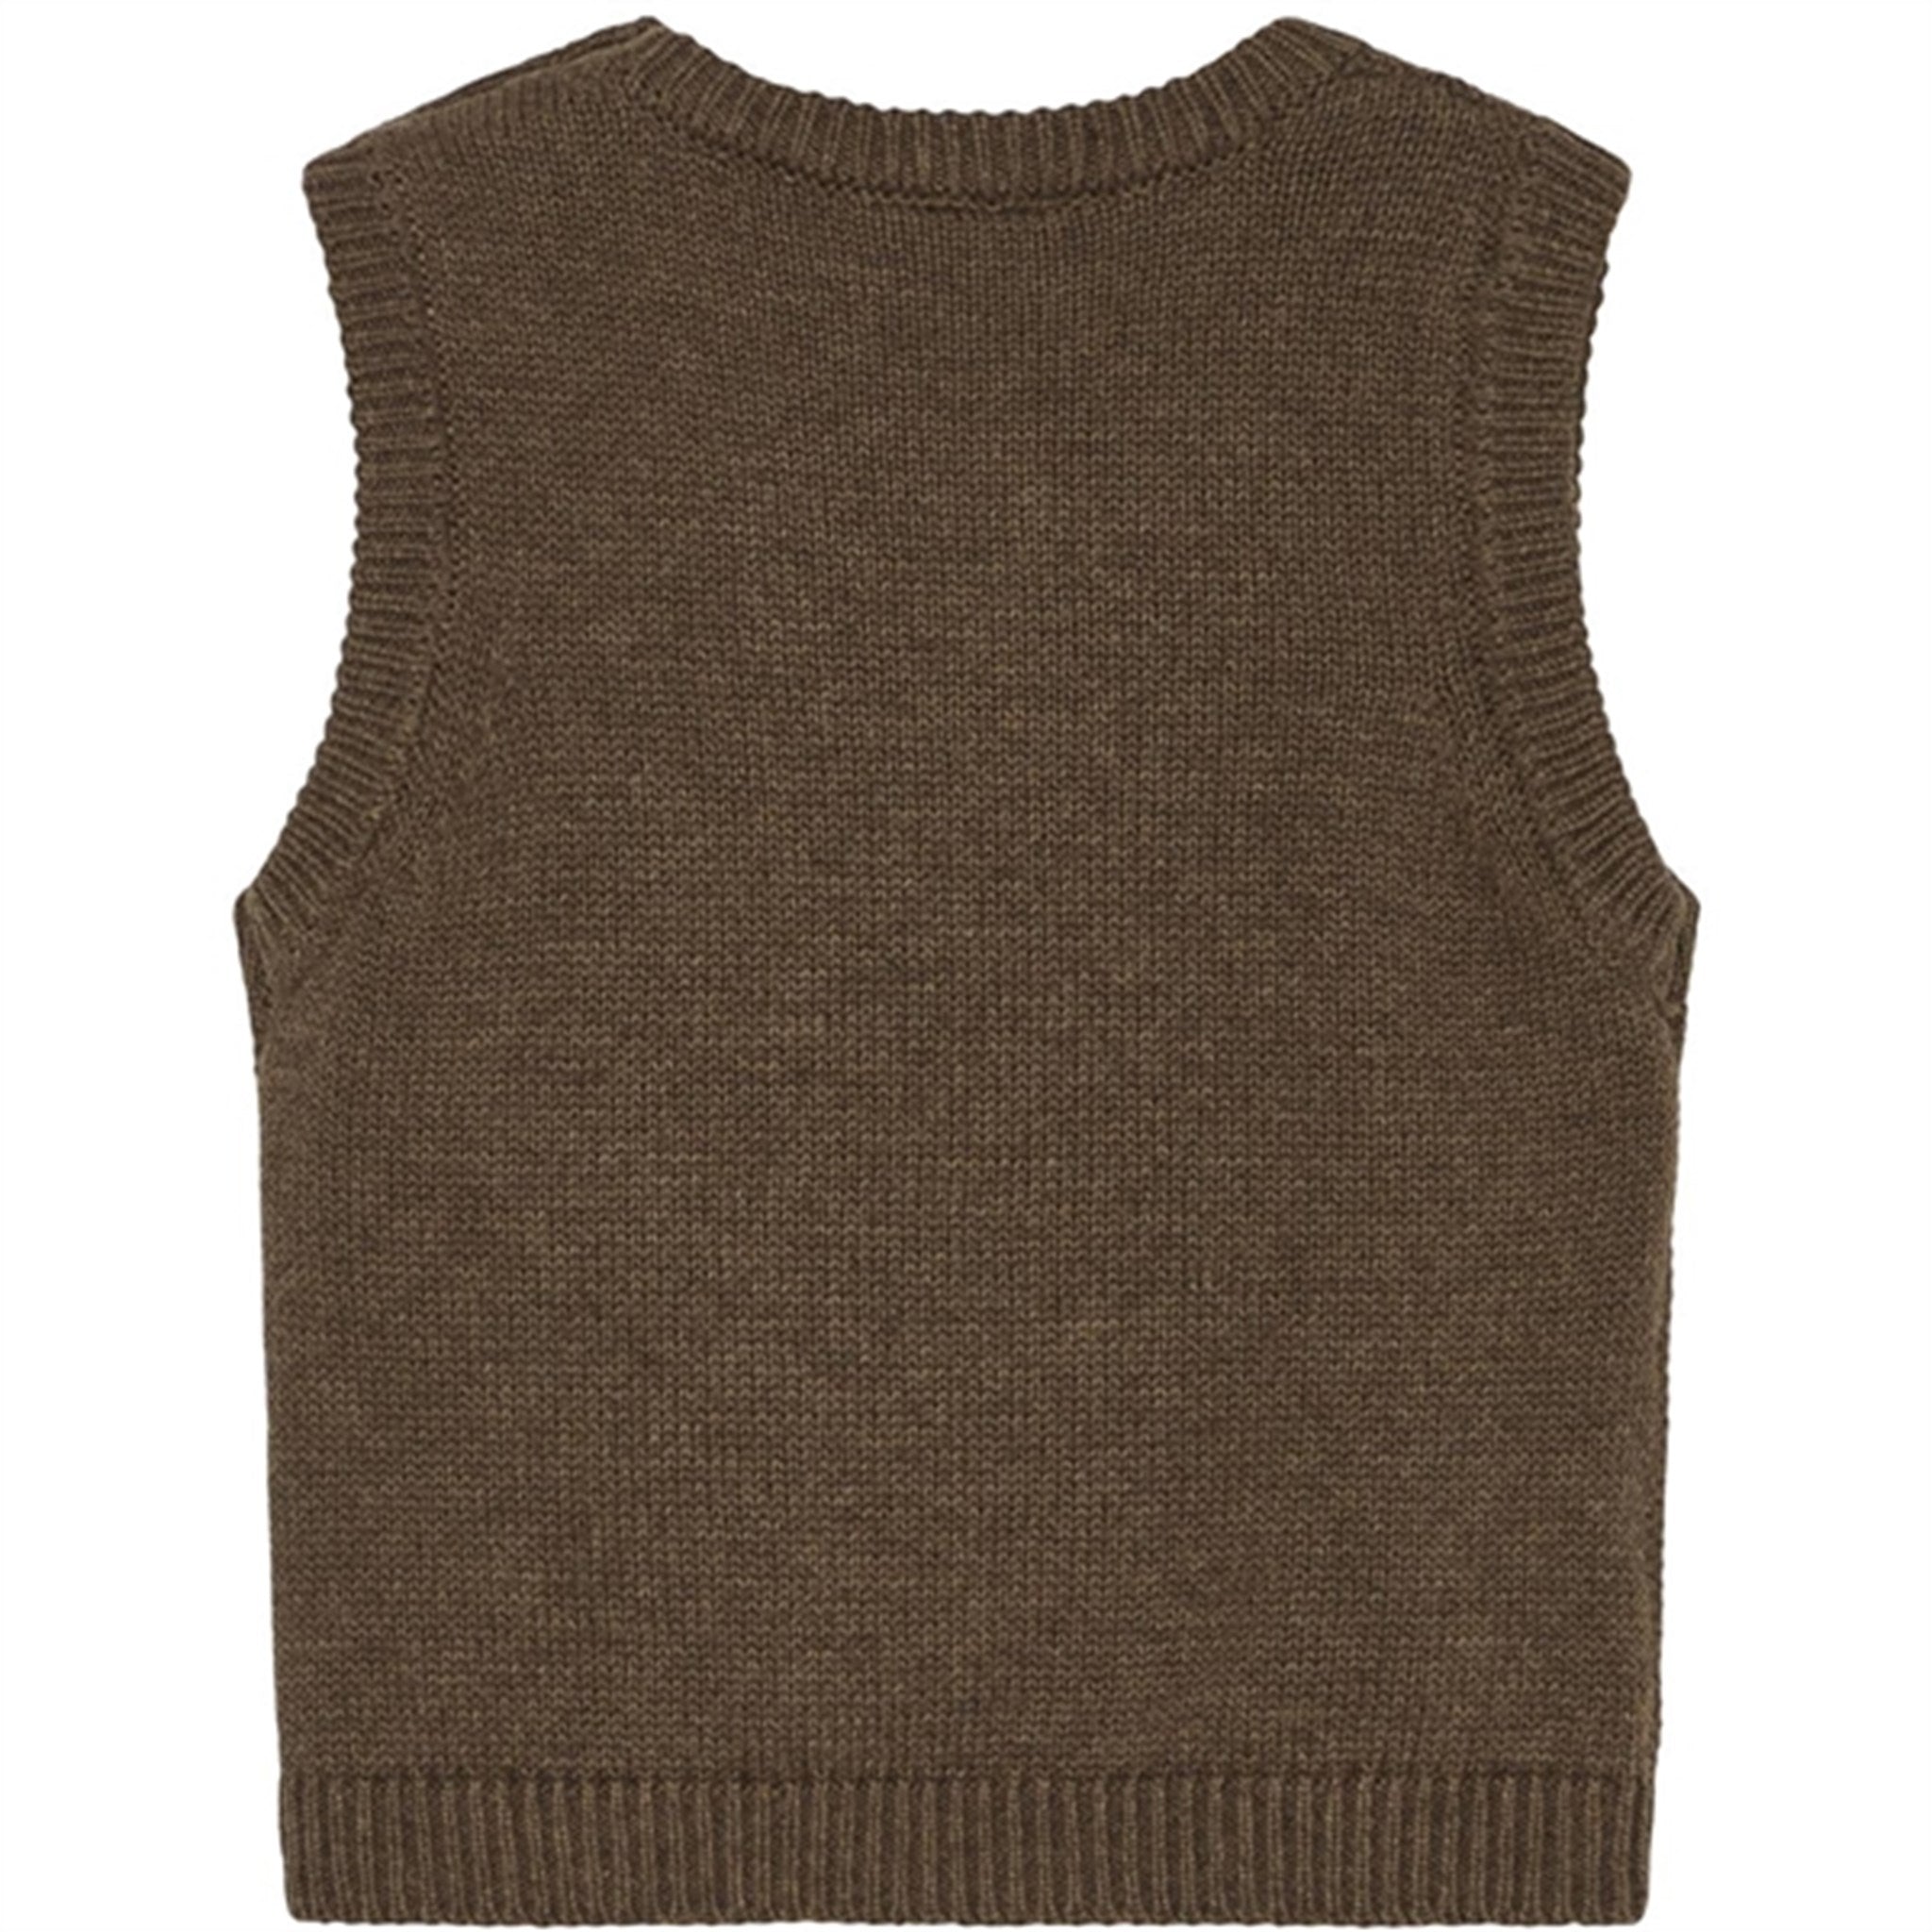 Hust & Claire Baby Cub Brown Perrie Vest 2